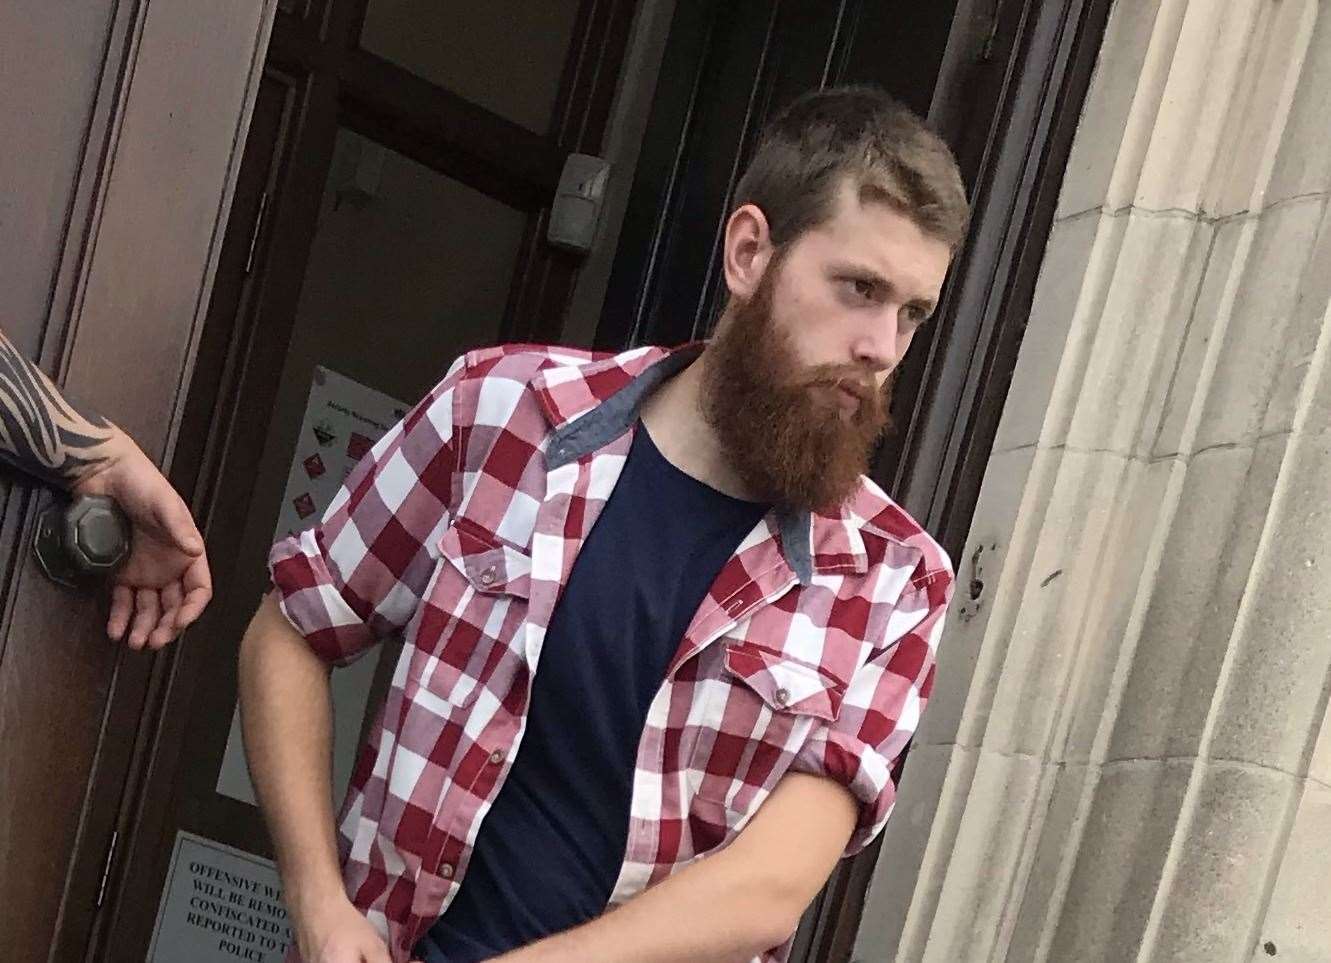 Baker pictured leaving a court hearing last year